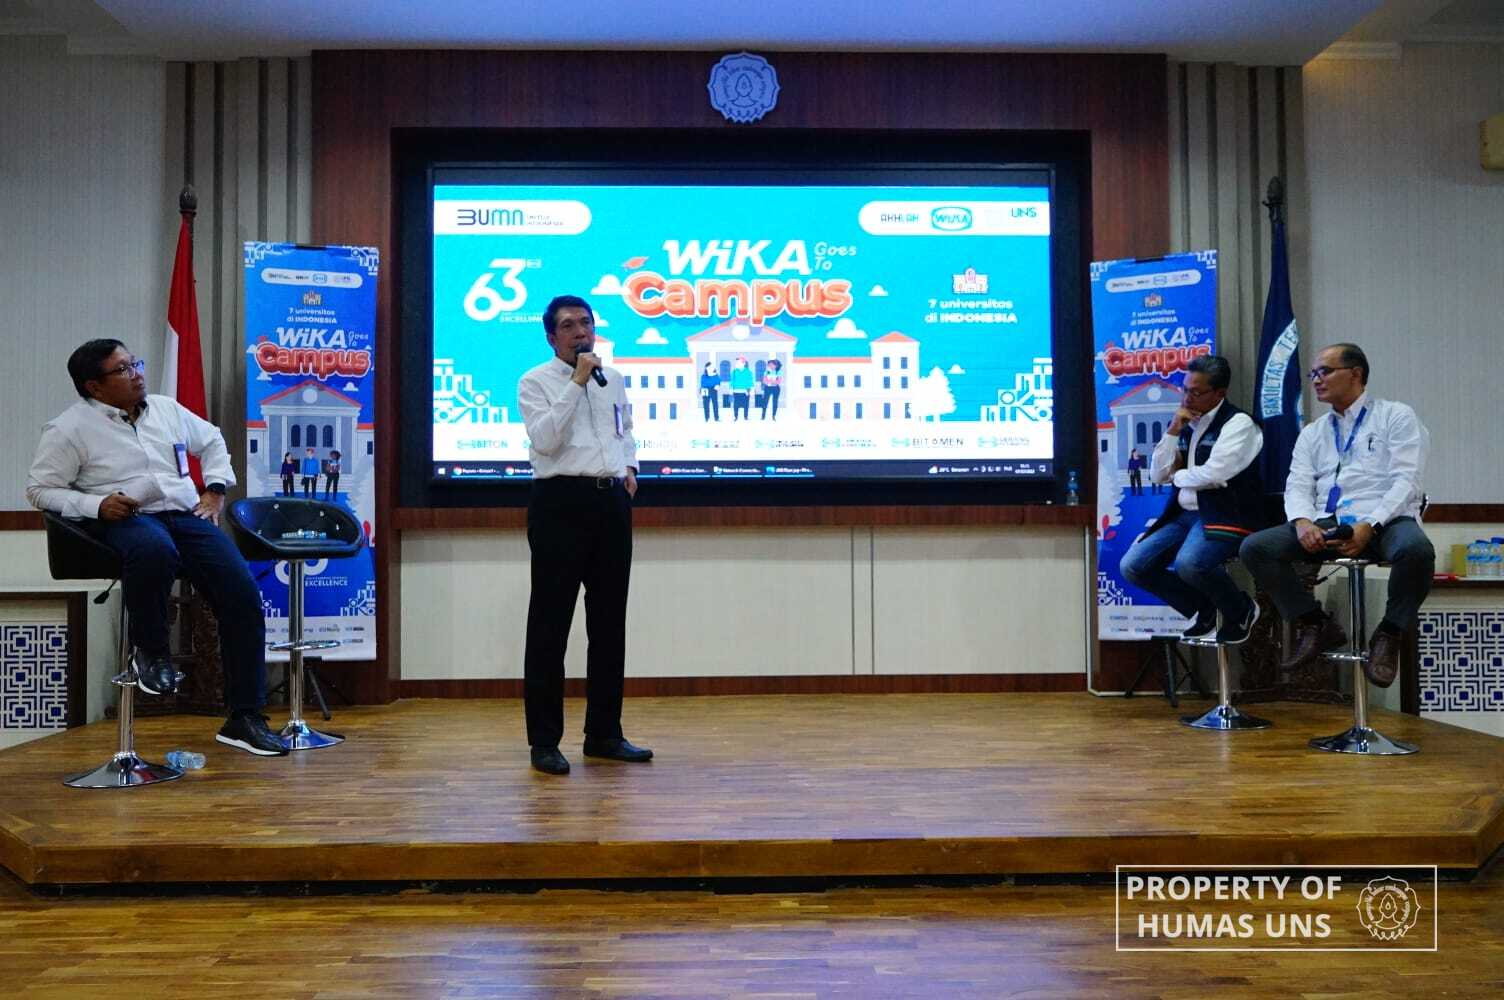 PT Wijaya Karya Held a Public Lecture Entitled 'Wika Goes to Campus' at FT UNS